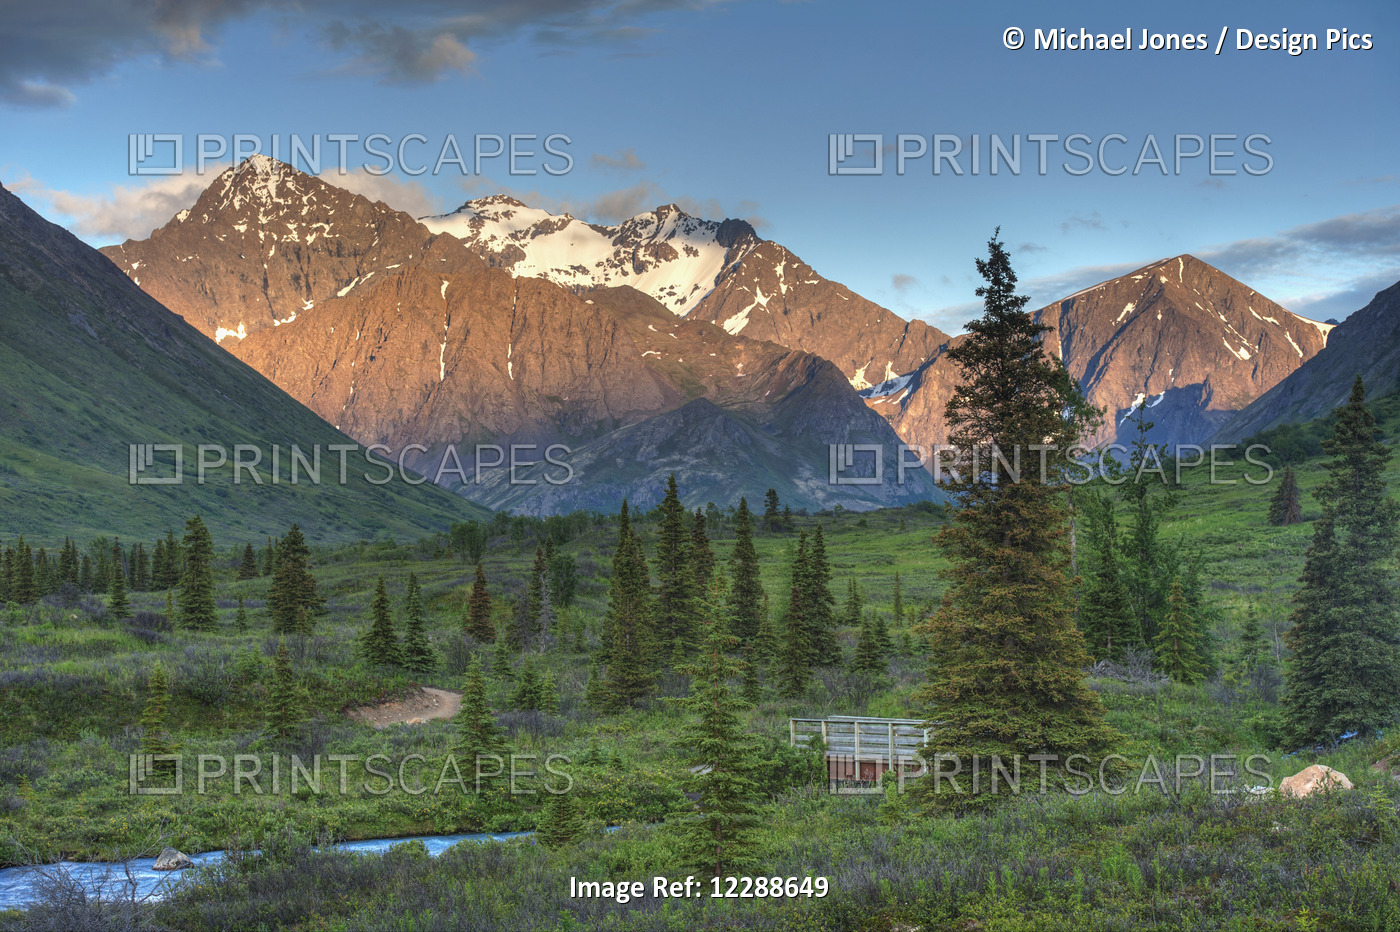 South Fork Near Eagle River At Sunset On A Summer Day In South Central Alaska.